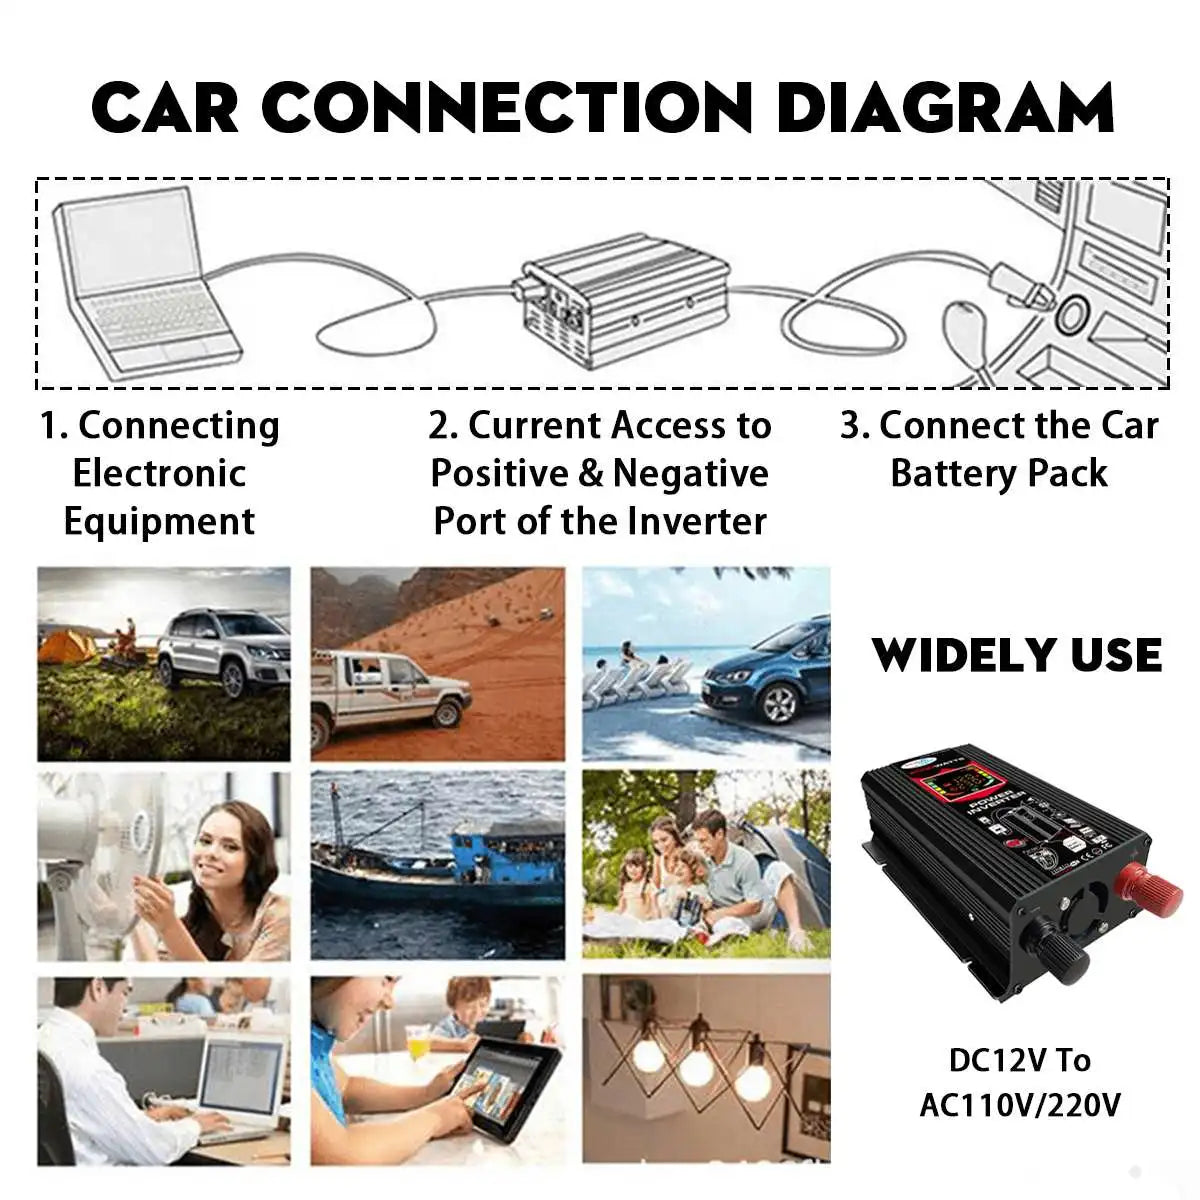 Connect car battery to inverter for converting DC power to AC power.